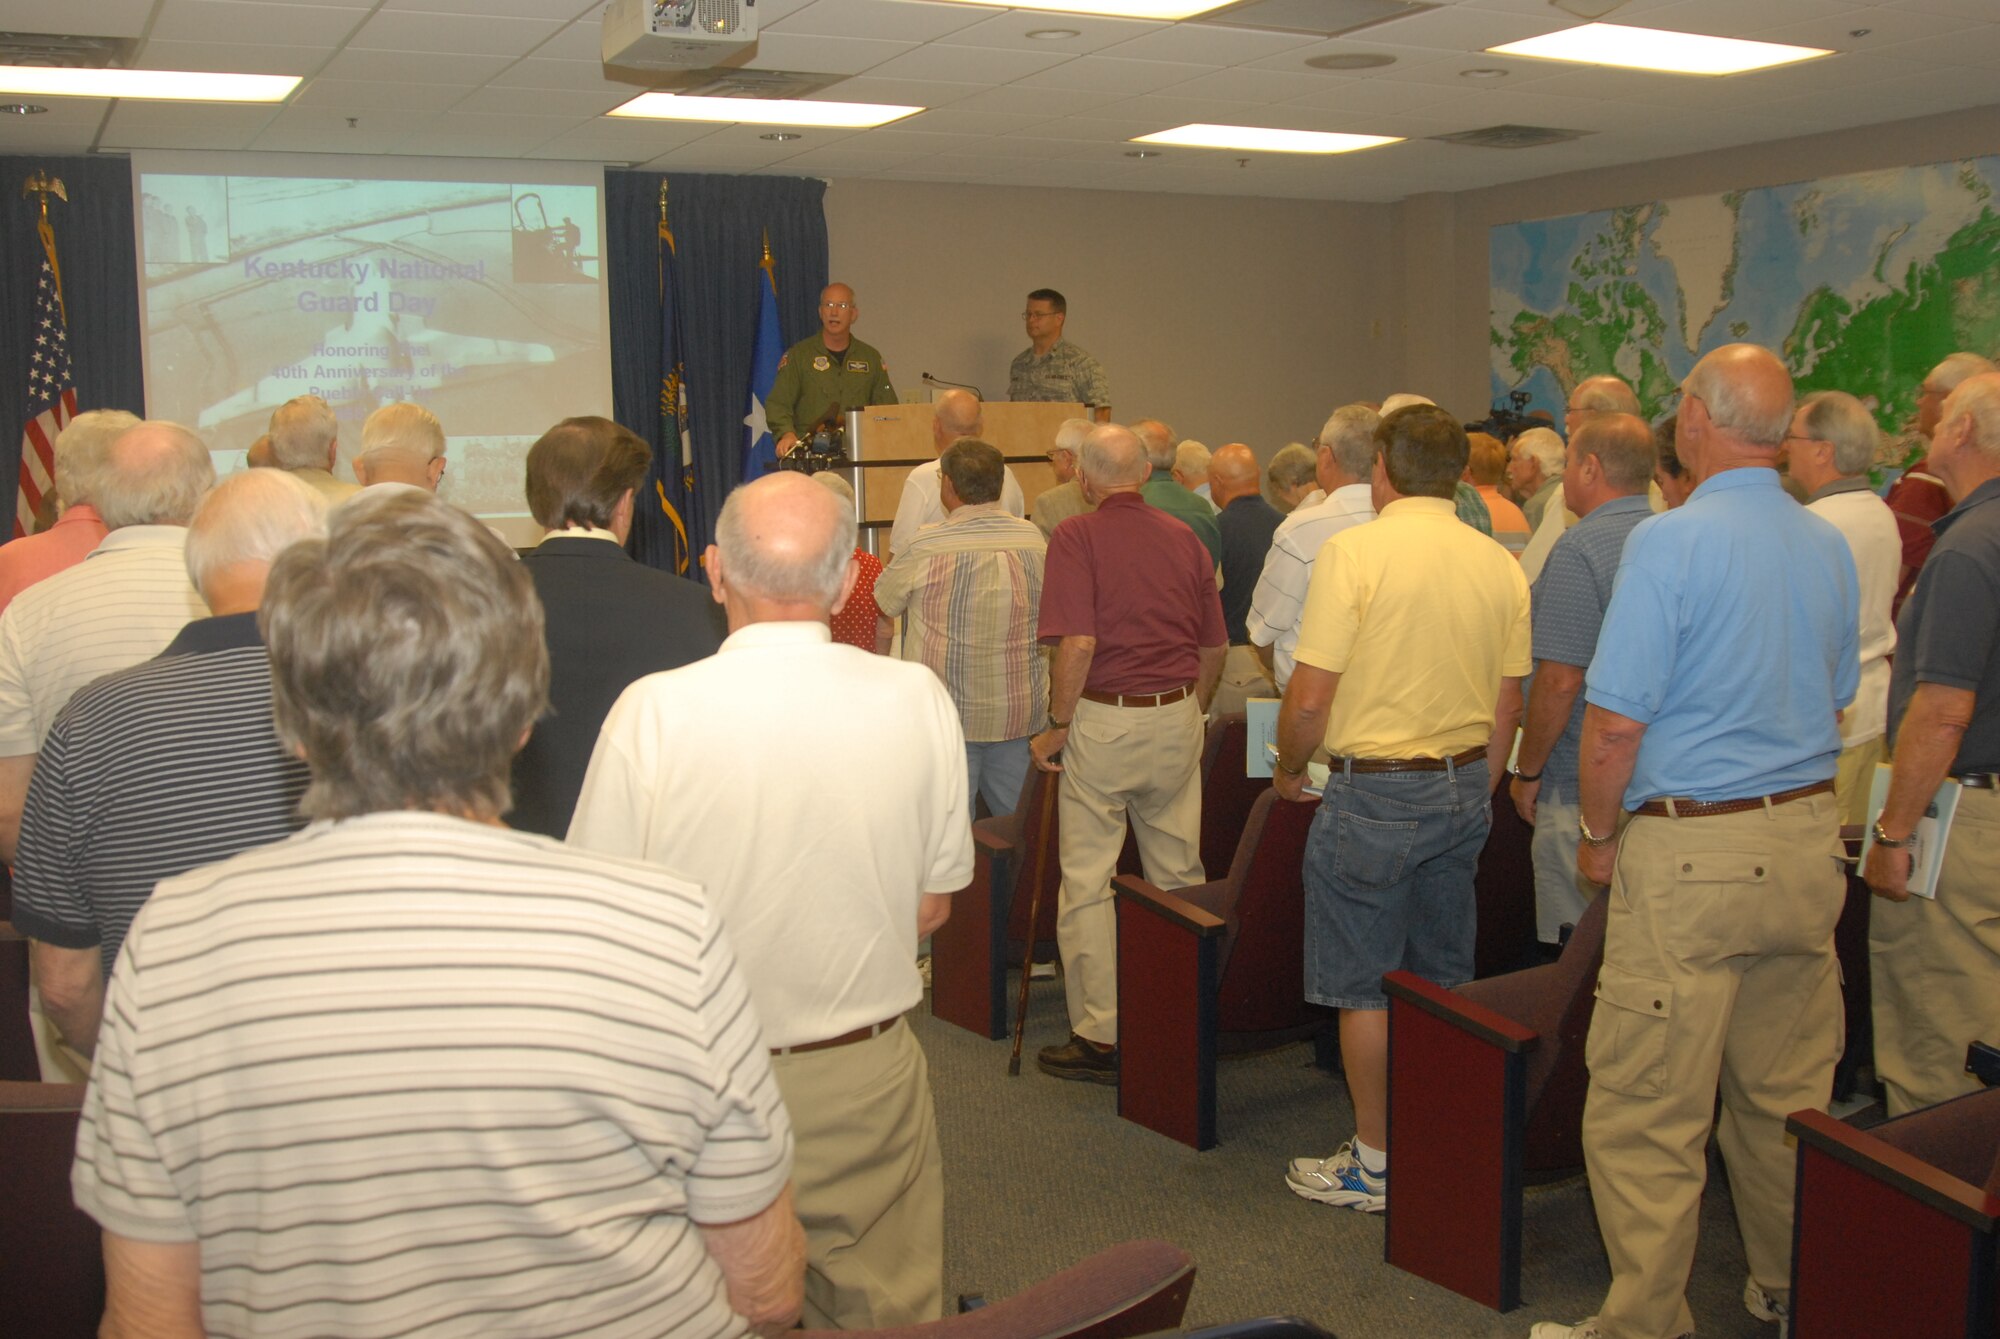 Colonel Mark R. Kraus delivers the governor’s proclamation to over 100 attendees at the 7th annual Kentucky National Guard Day celebration at the Air National Guard headquarters in Louisville on Tuesday, June 24, 2008 – photo by Tech. Sgt. Philip S. Speck

